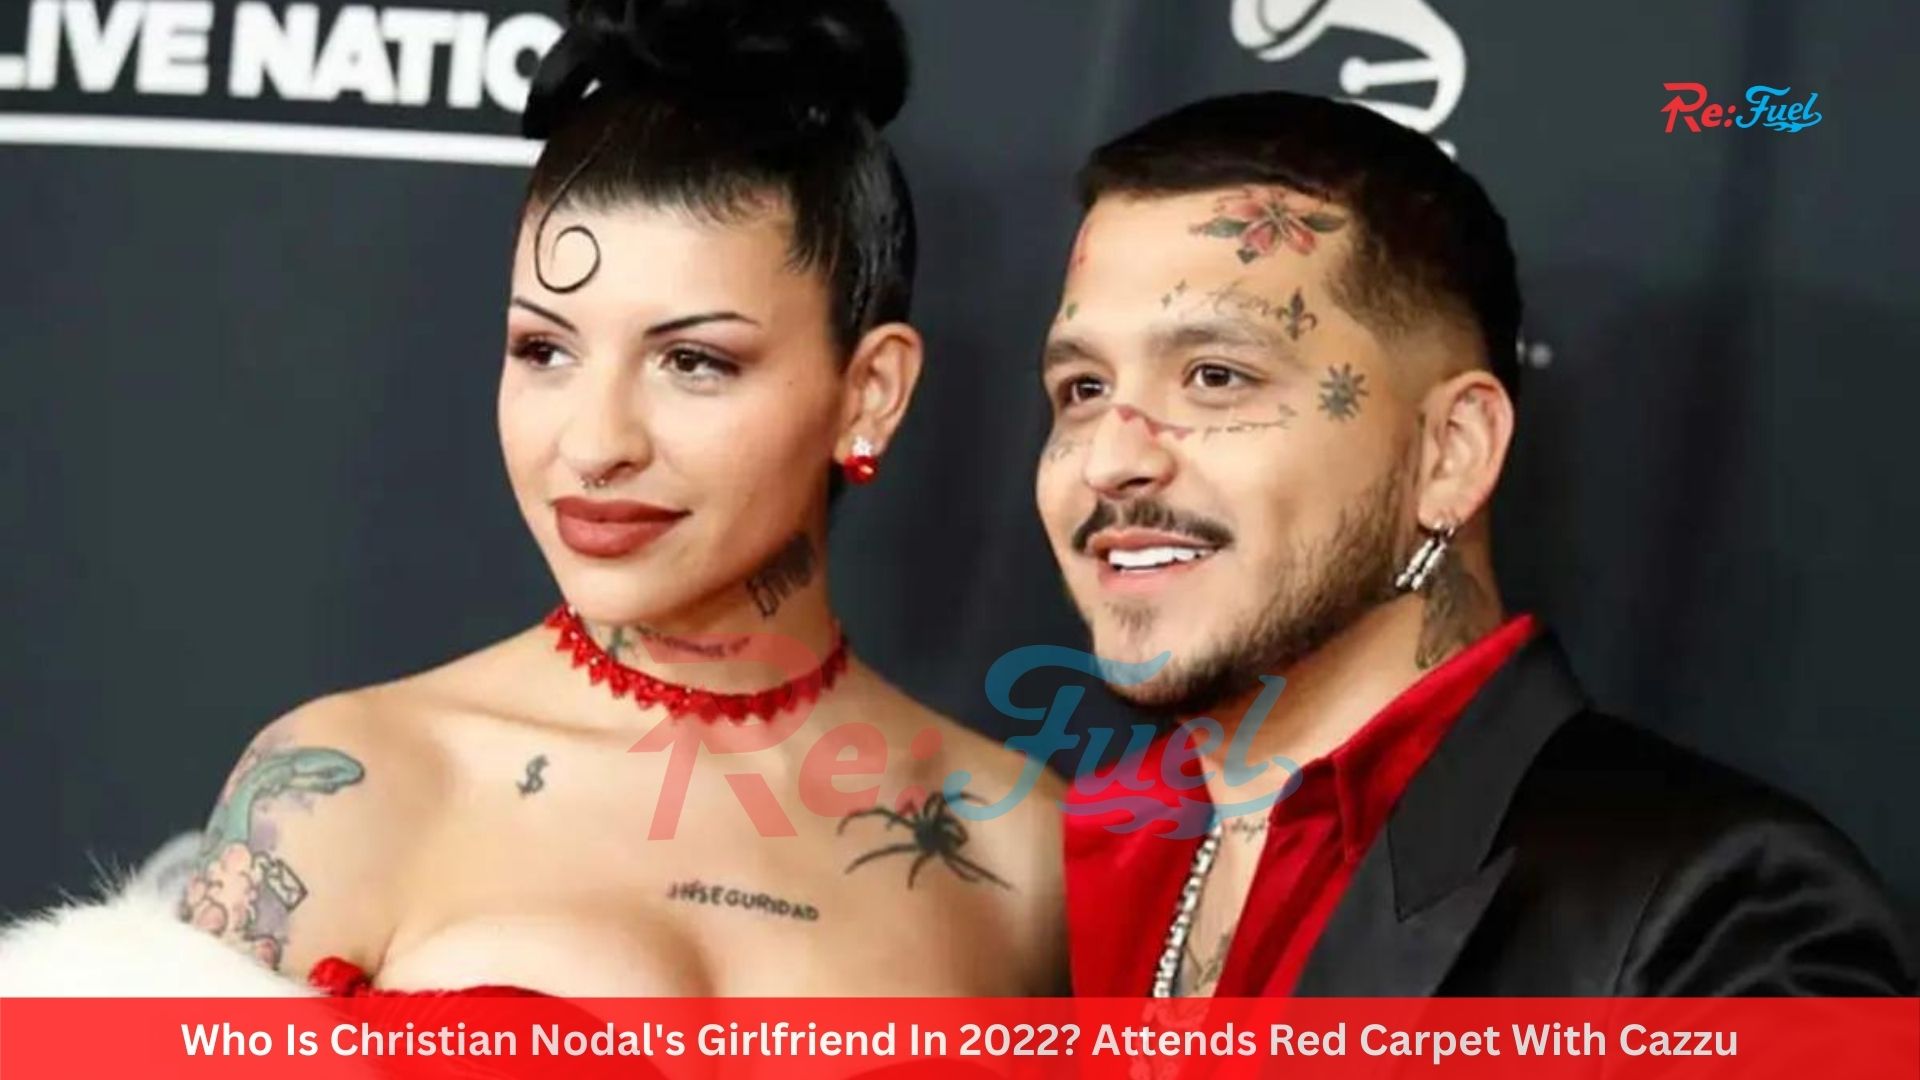 Who Is Christian Nodal's Girlfriend In 2022? Attends Red Carpet With Cazzu